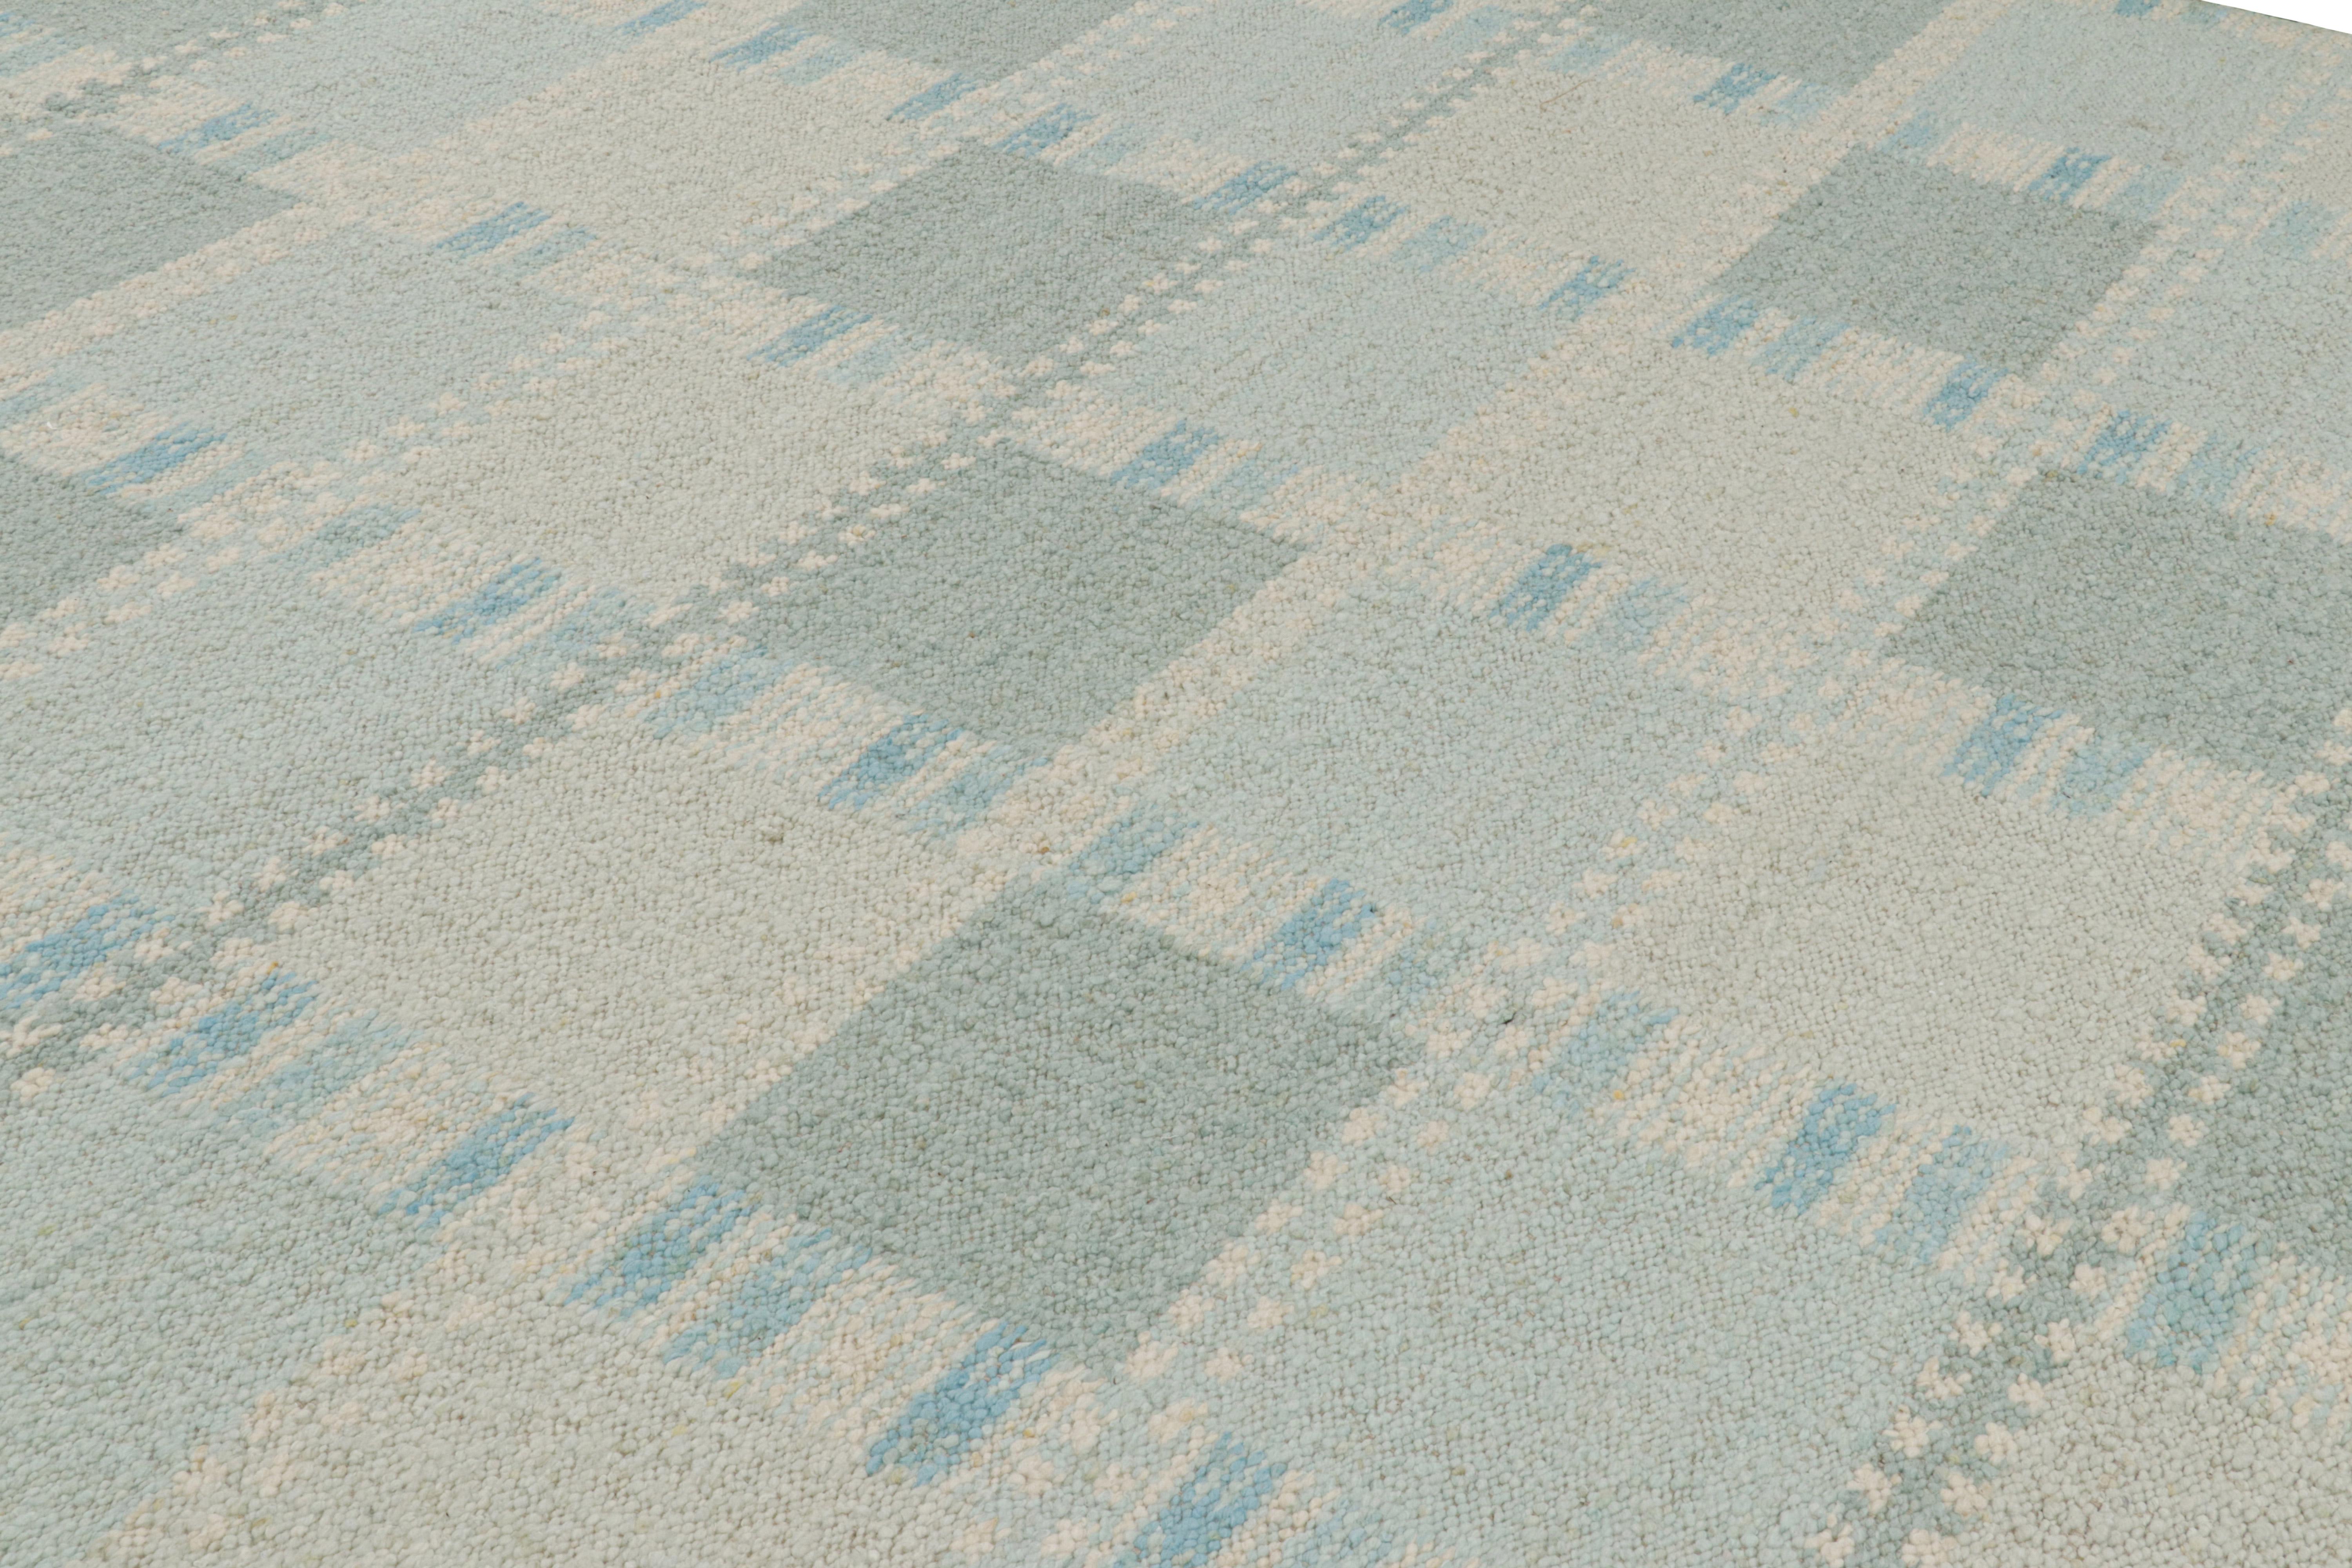 Handwoven in wool, this smart 10x14 Swedish style flat weave is Rug & Kilim’s “Nu” texture in their Scandinavian rug collection. 

On the design: 

Our “Nu” flat weave enjoys a boucle-like texture of blended yarns, and a look both impressionistic